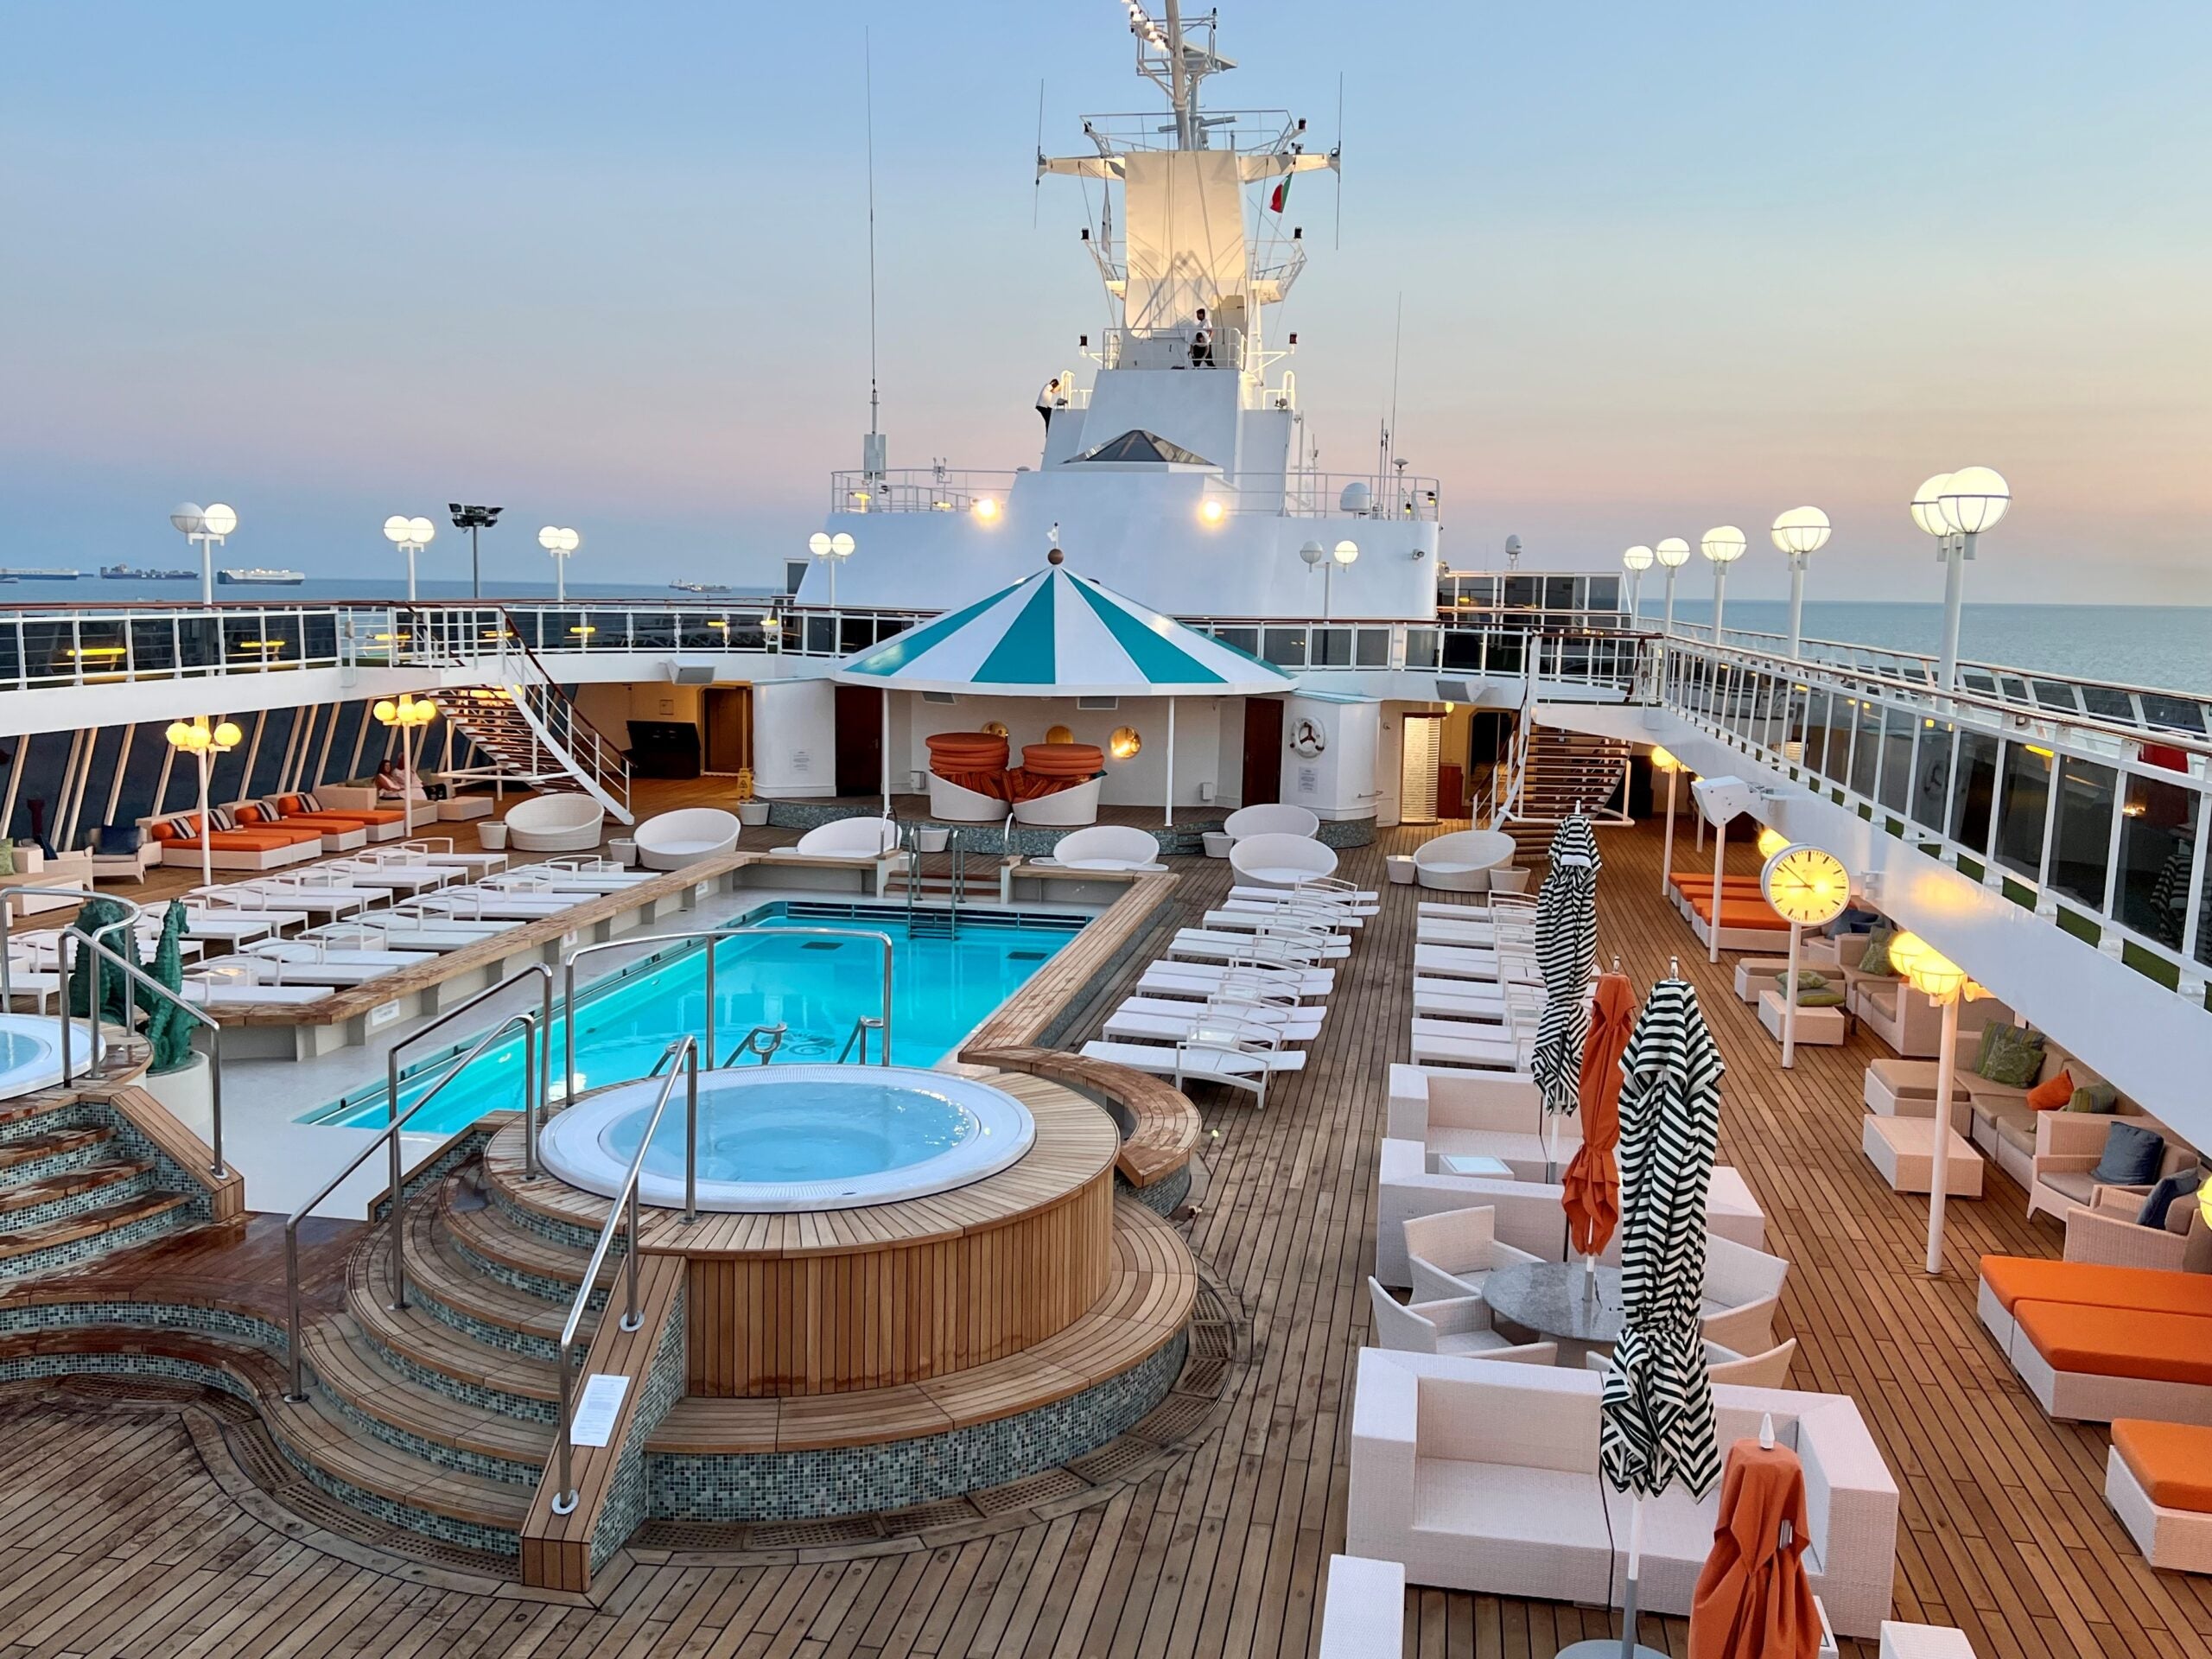 crystal serenity cruise ship pictures